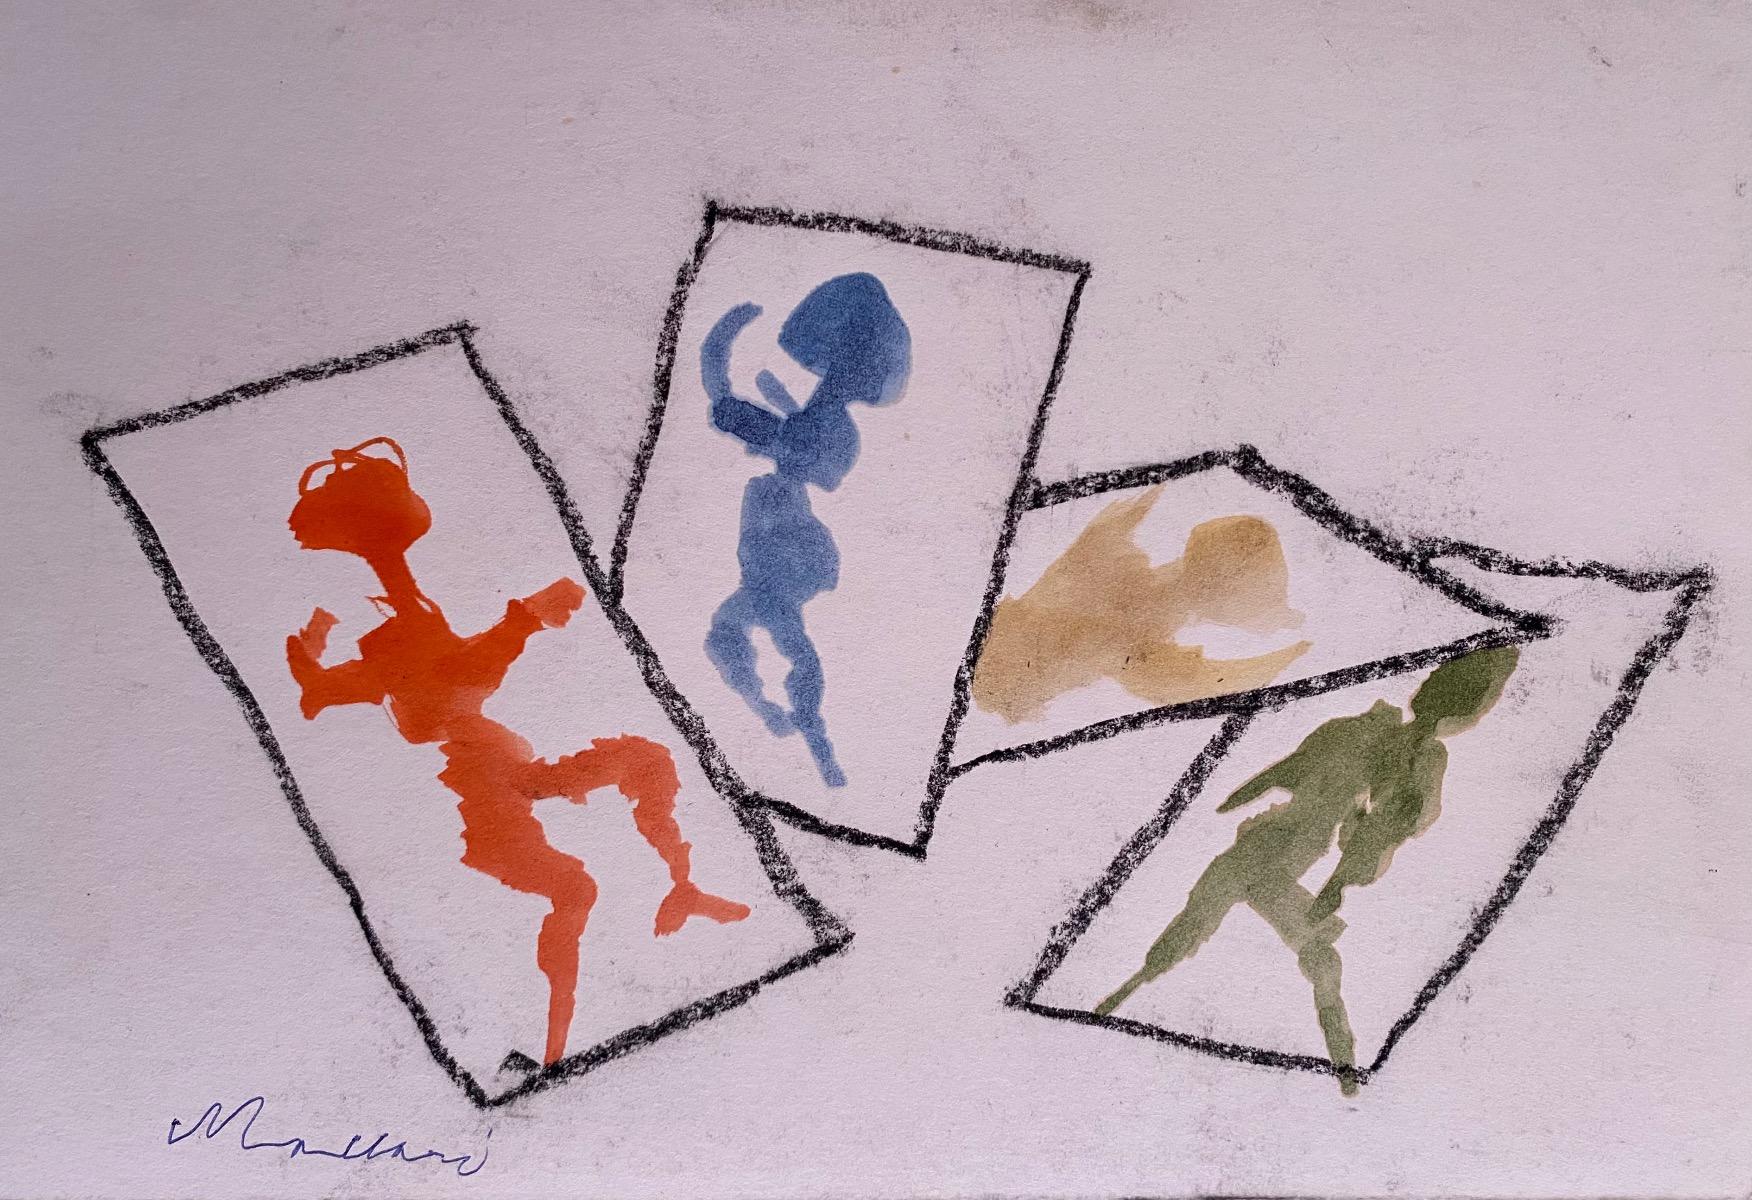 Shadows is an original modern artwork realized the 1965s by the Italian artist Mino Maccari (Siena, 1898 - Rome, 1989).

Original pencil and watercolor drawing on Ivory cardboard. 

Hand-signed in pencil n by the artist on the lower right corner: